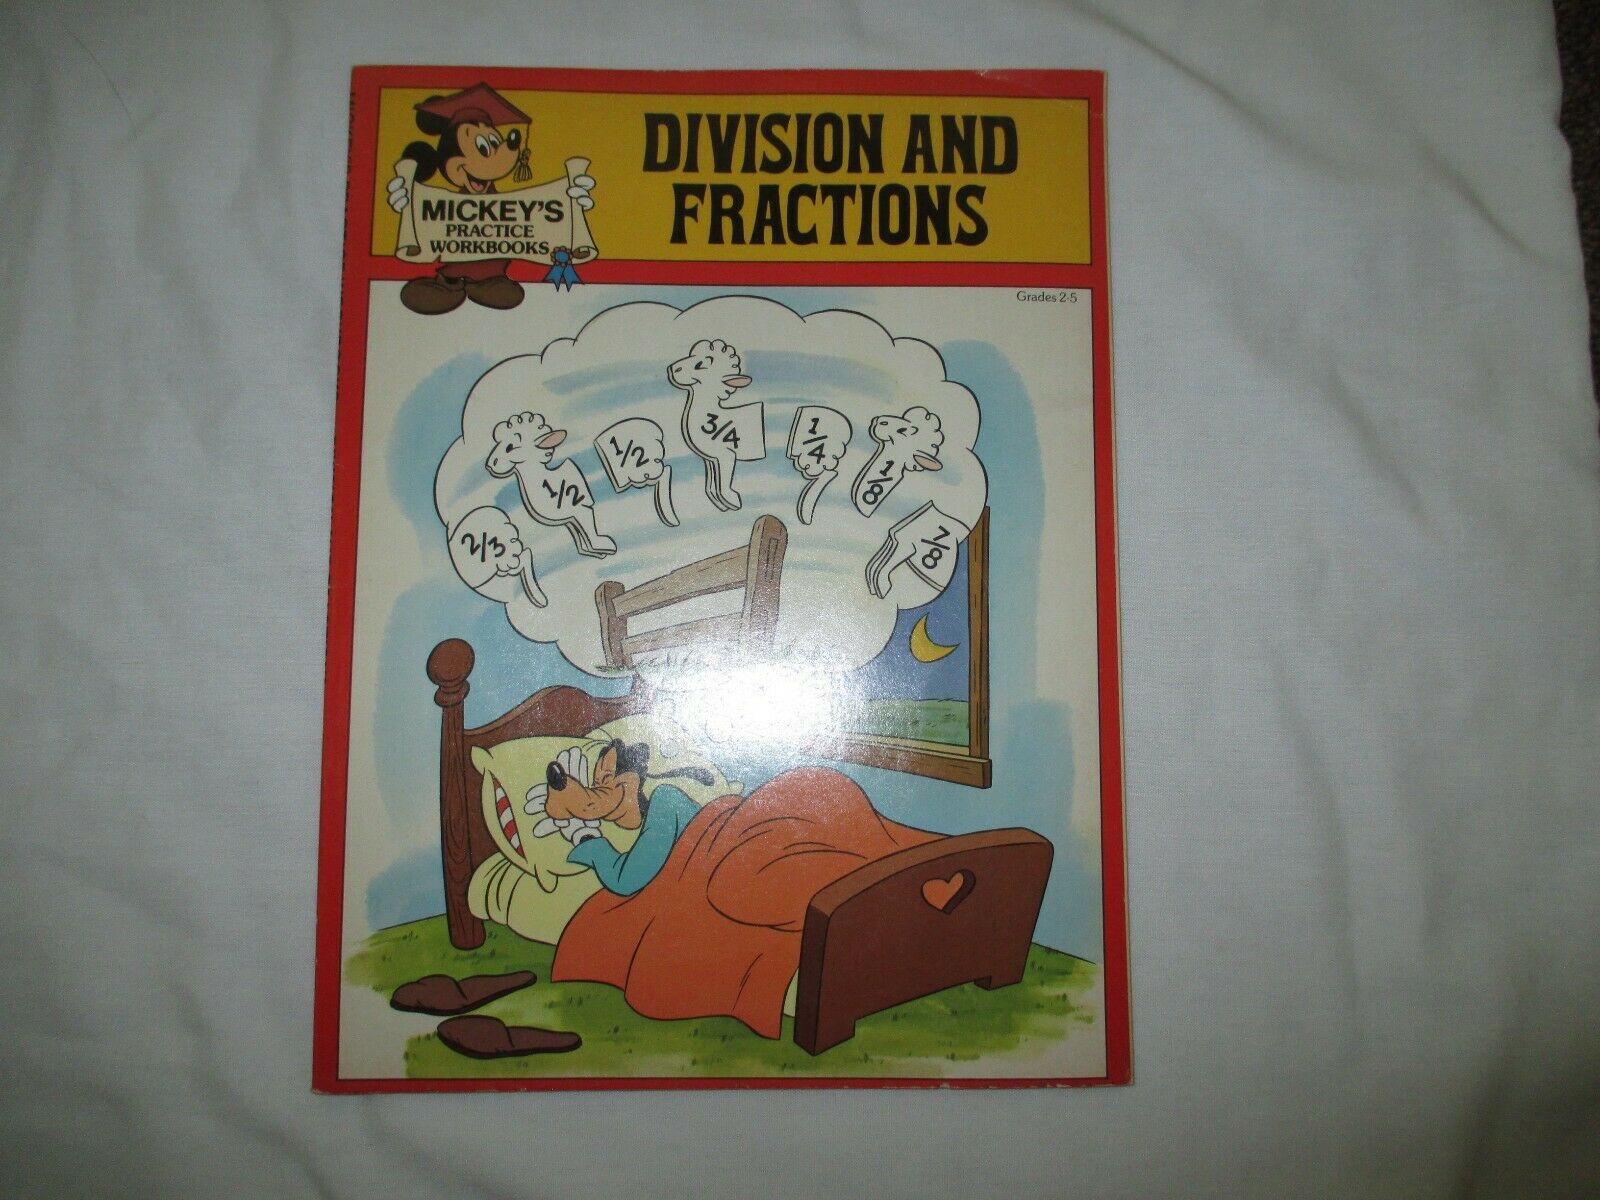 MICKEY'S DIVISION AND FRACTIONS PRACTICE WORKBOOK